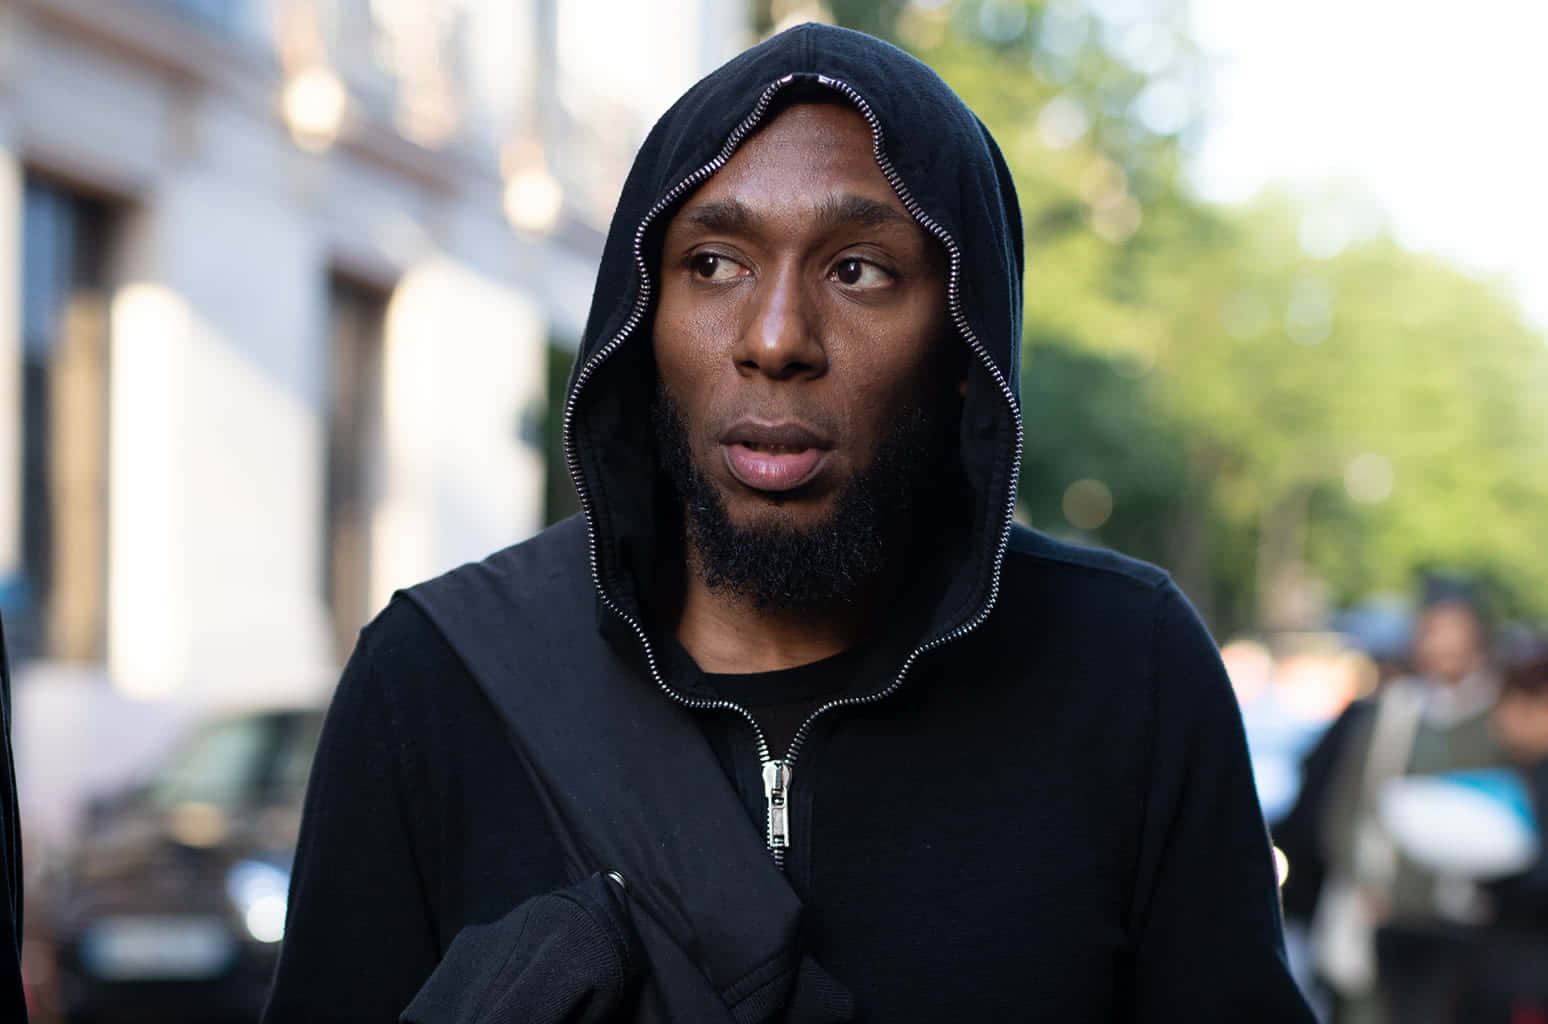 Download Yasiin Bey In A Promotional Photo Shoot Wallpaper